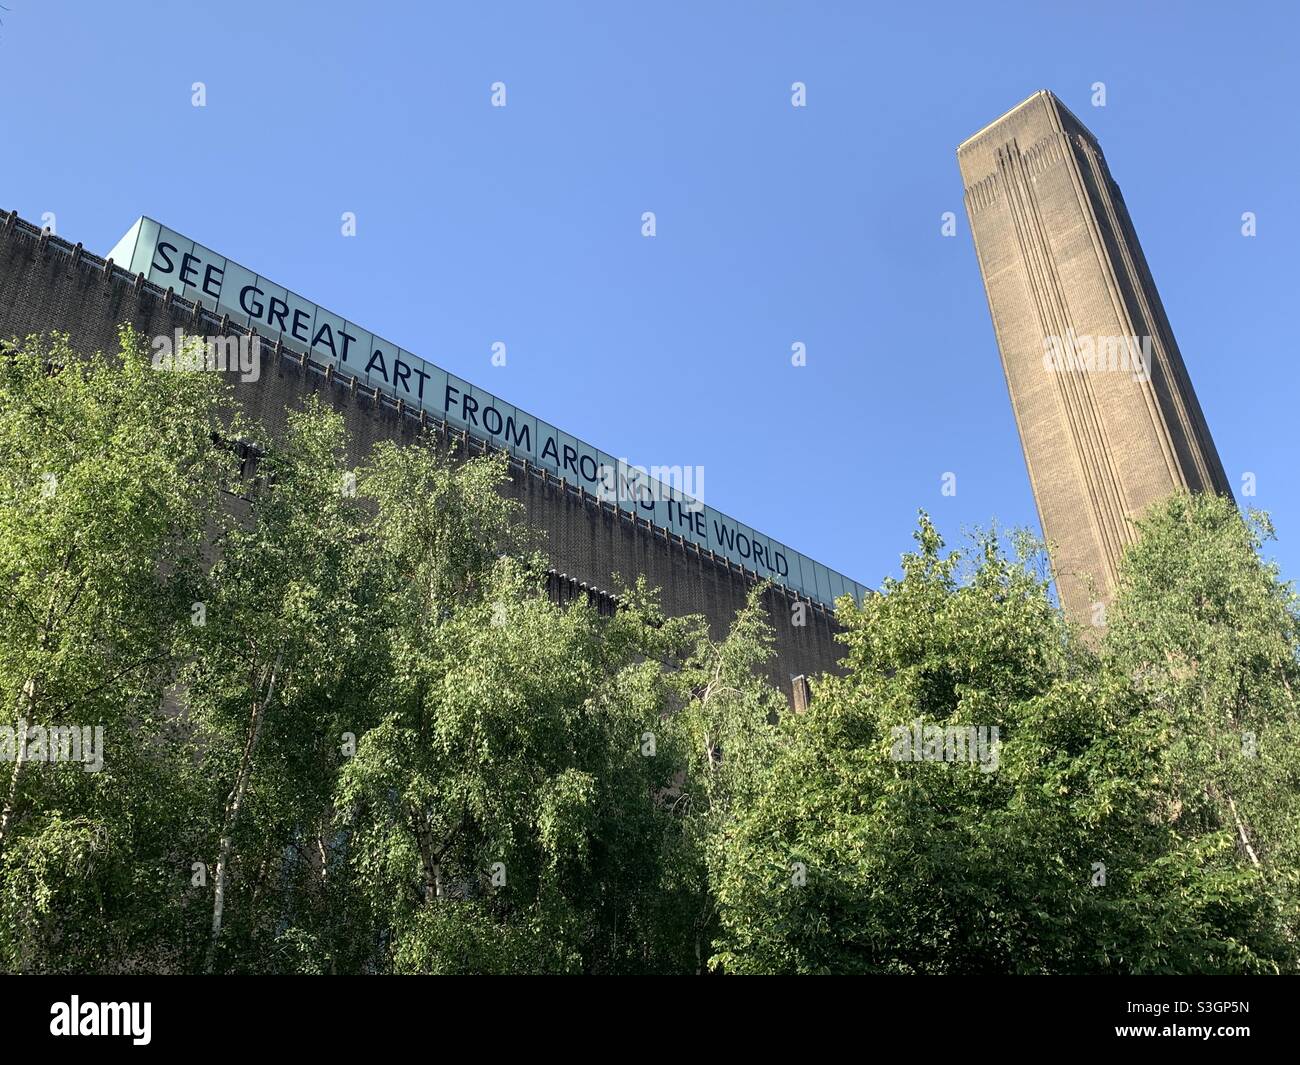 Tate Modern in London on a sunny day. Shows the Tate Modern’s slogan “See great art from around the world” Stock Photo